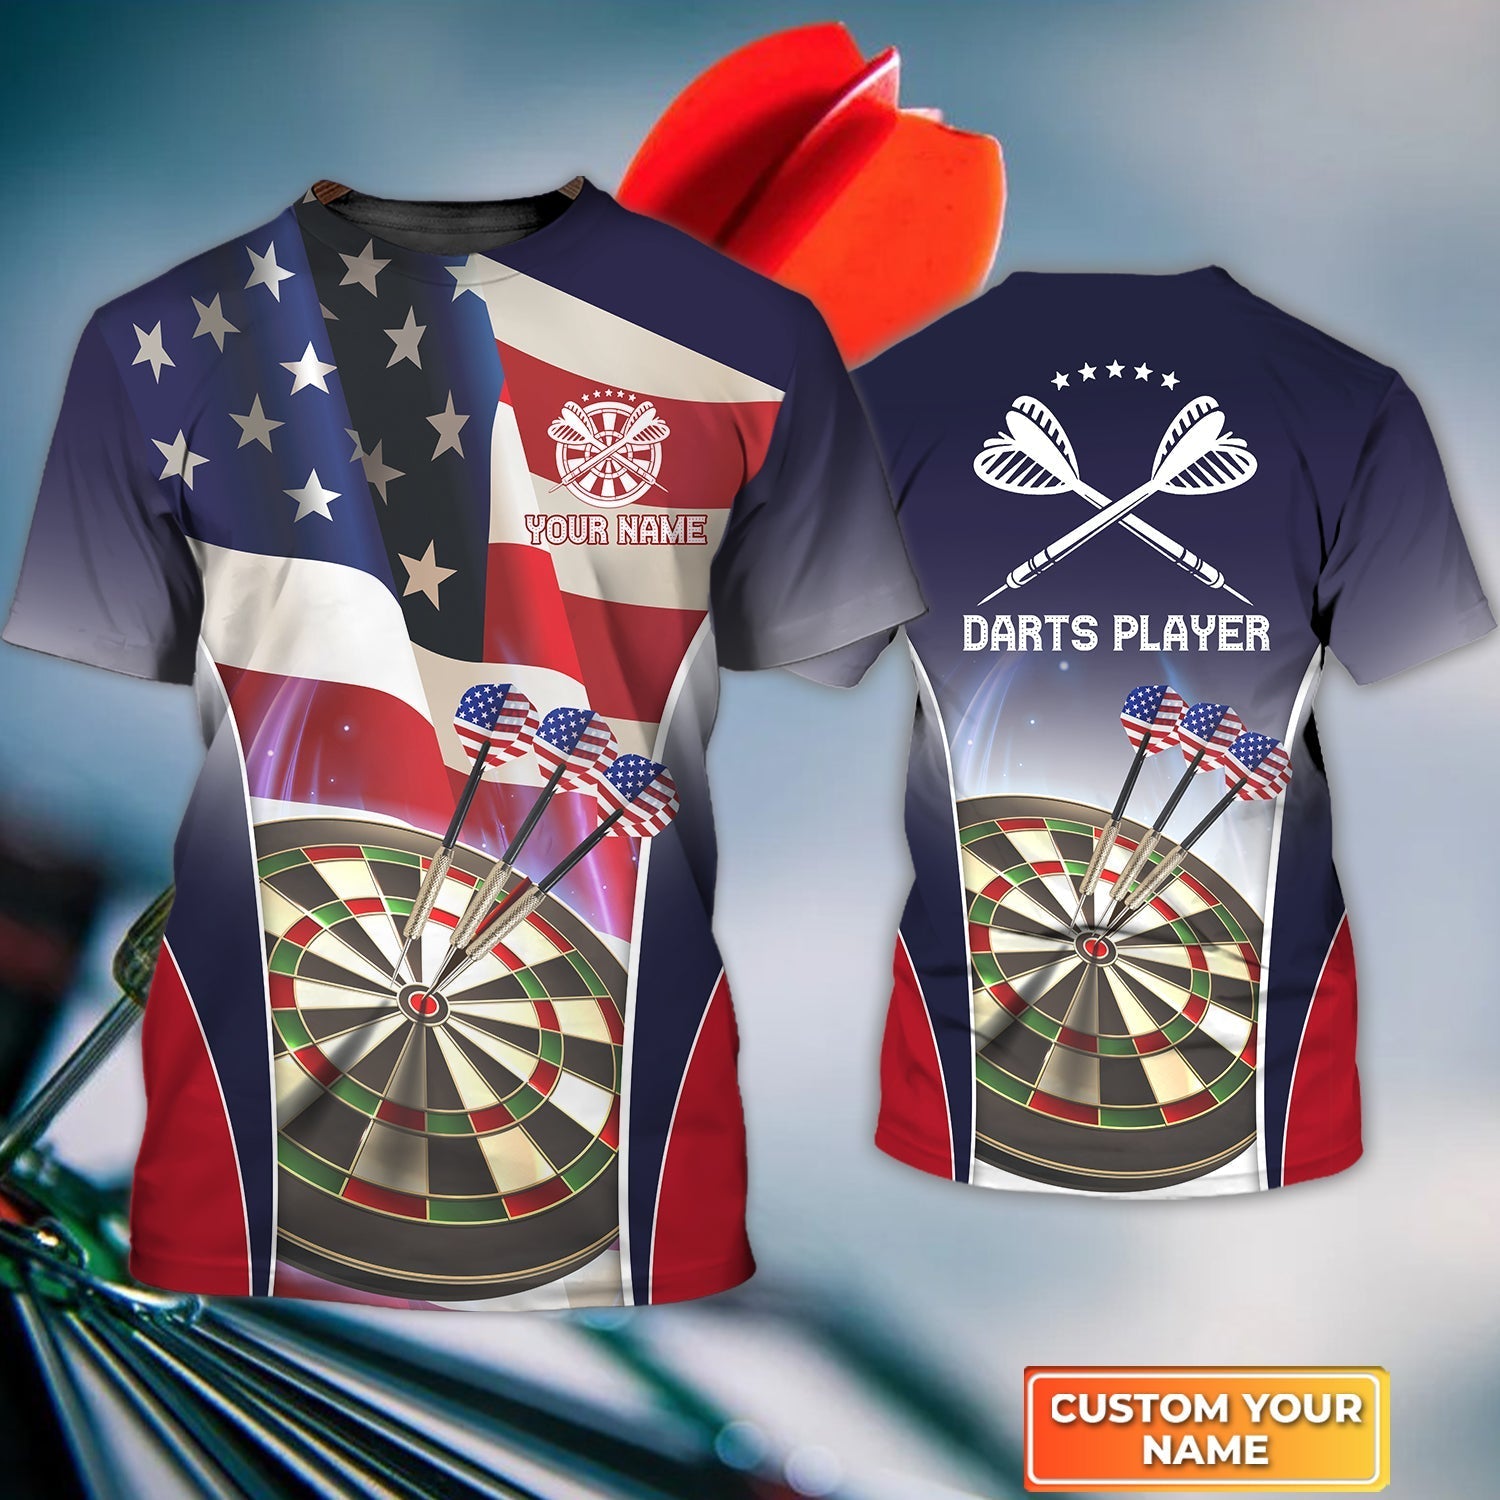 Darts Eagle American flag shirt, Personalized Name 3D Tshirt For Darts Player – DT183